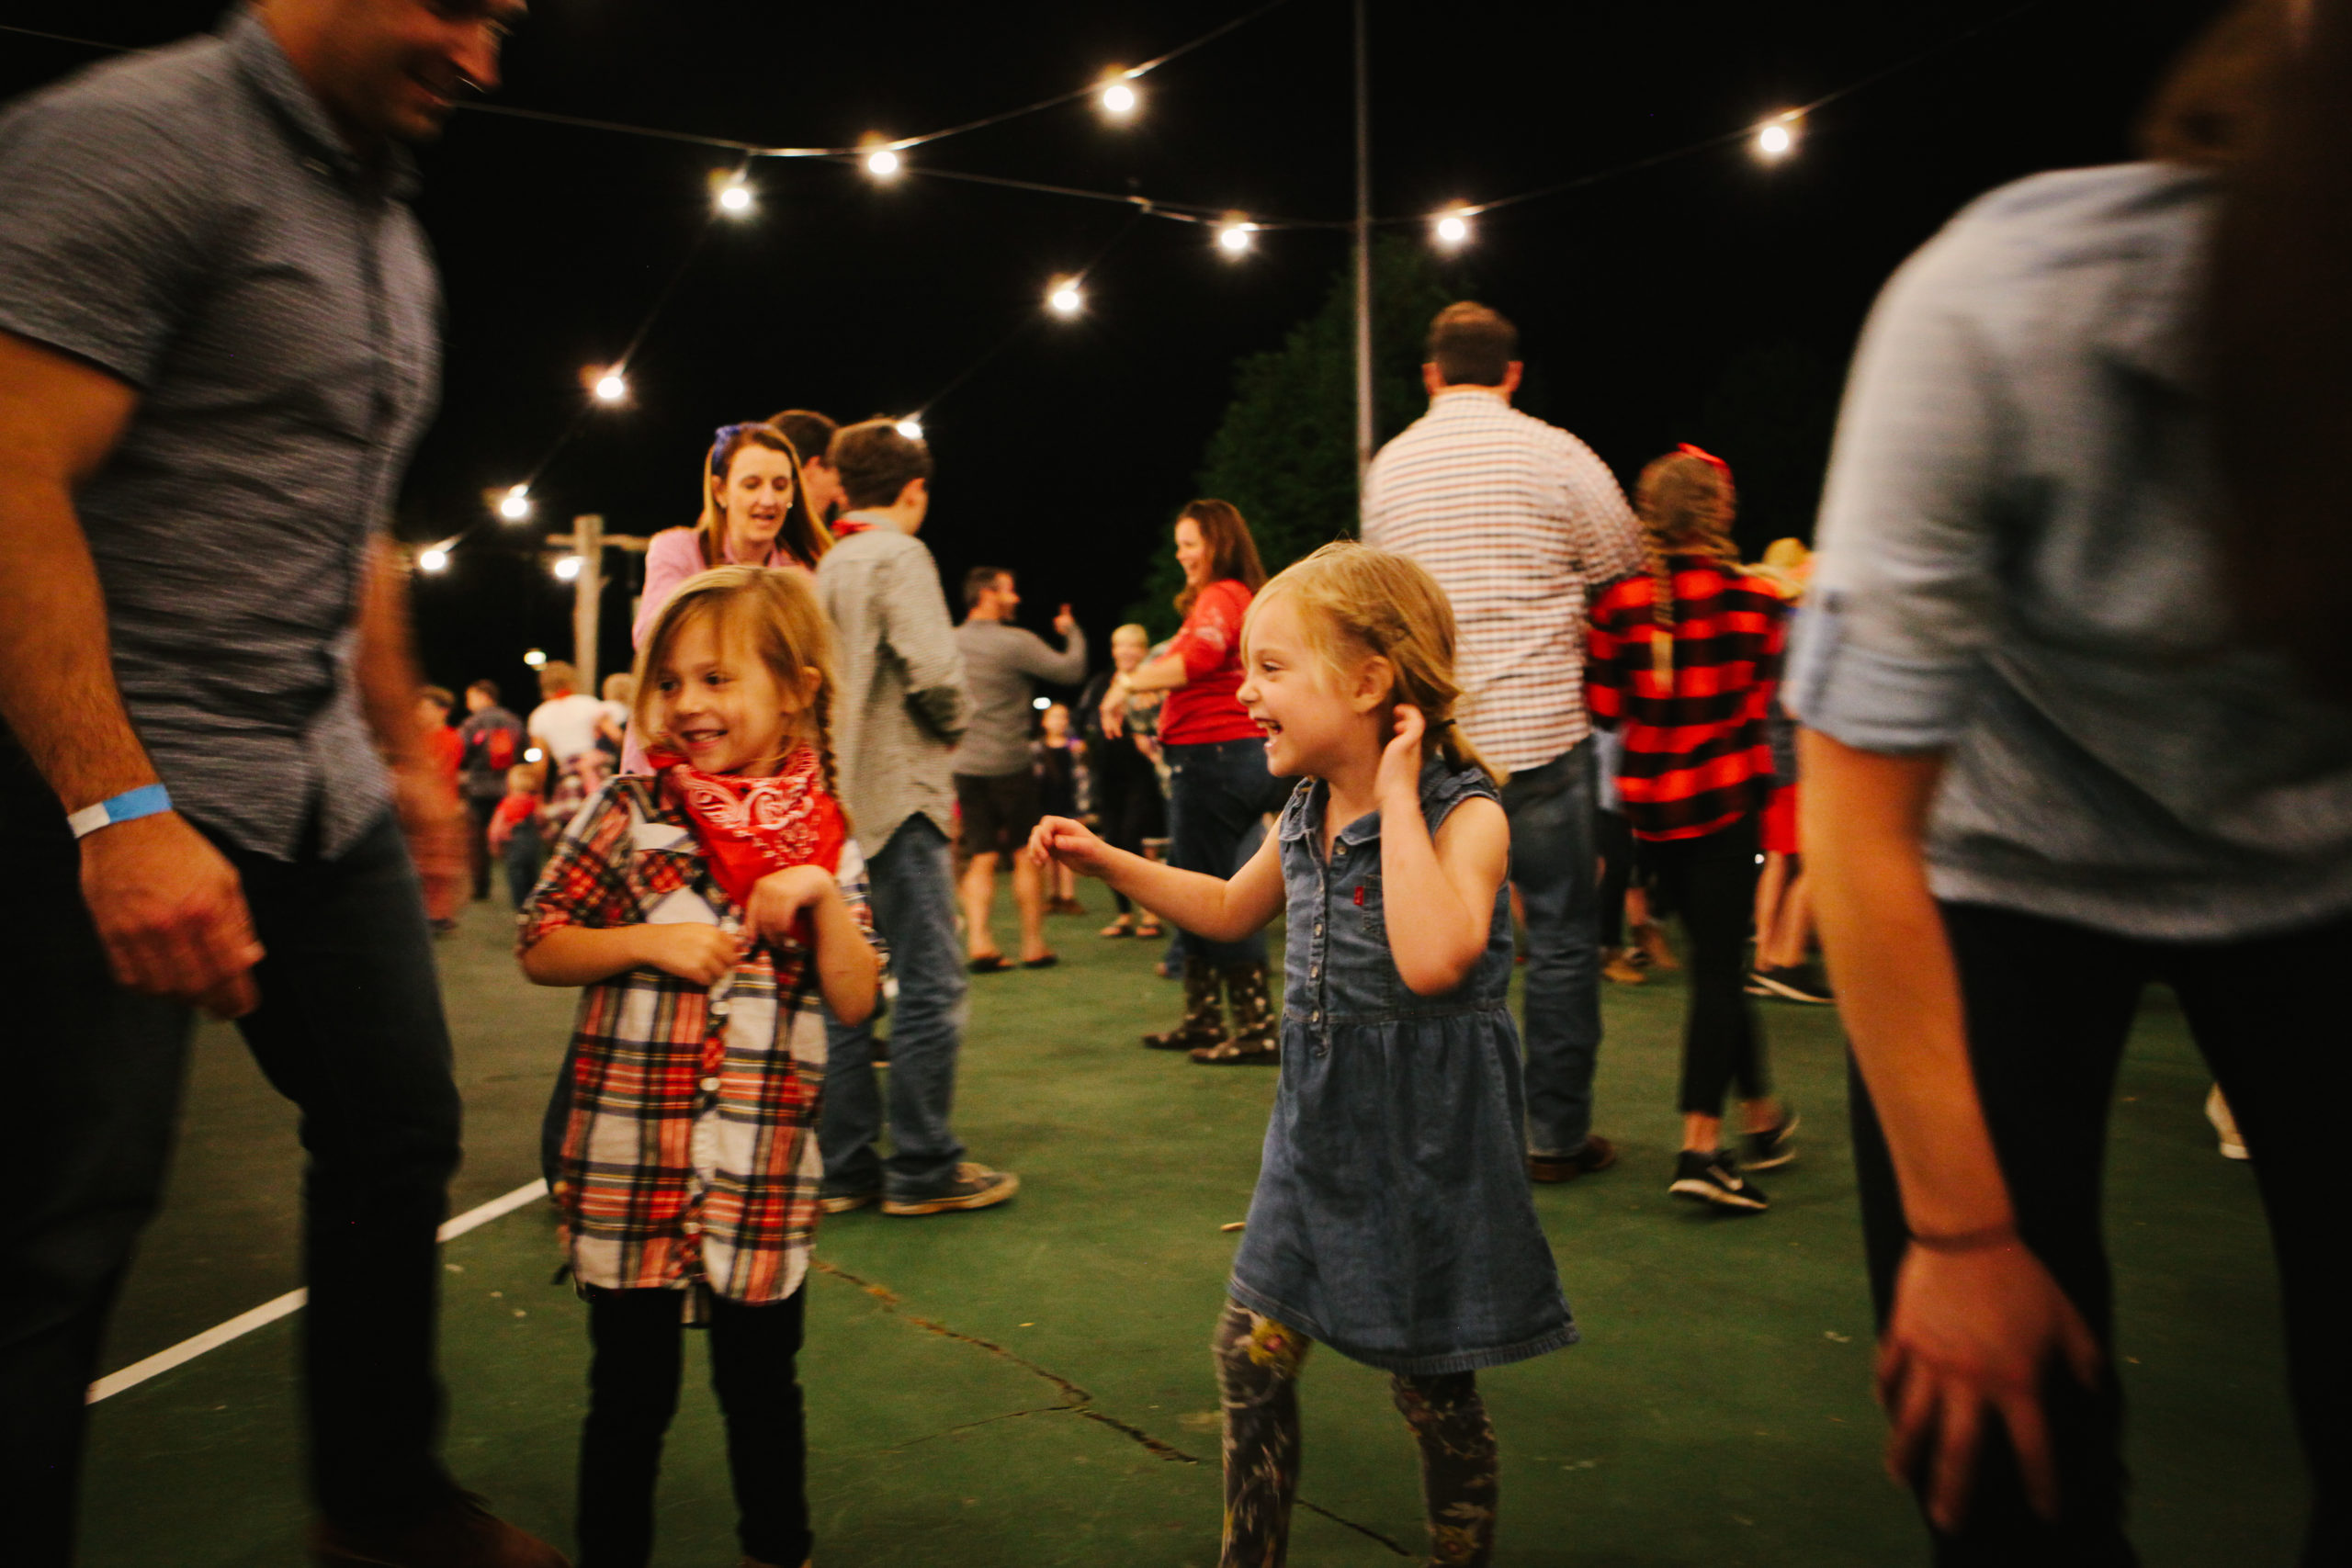 Top 10 Reasons to Bring Your Kids to Young Life Family Camp